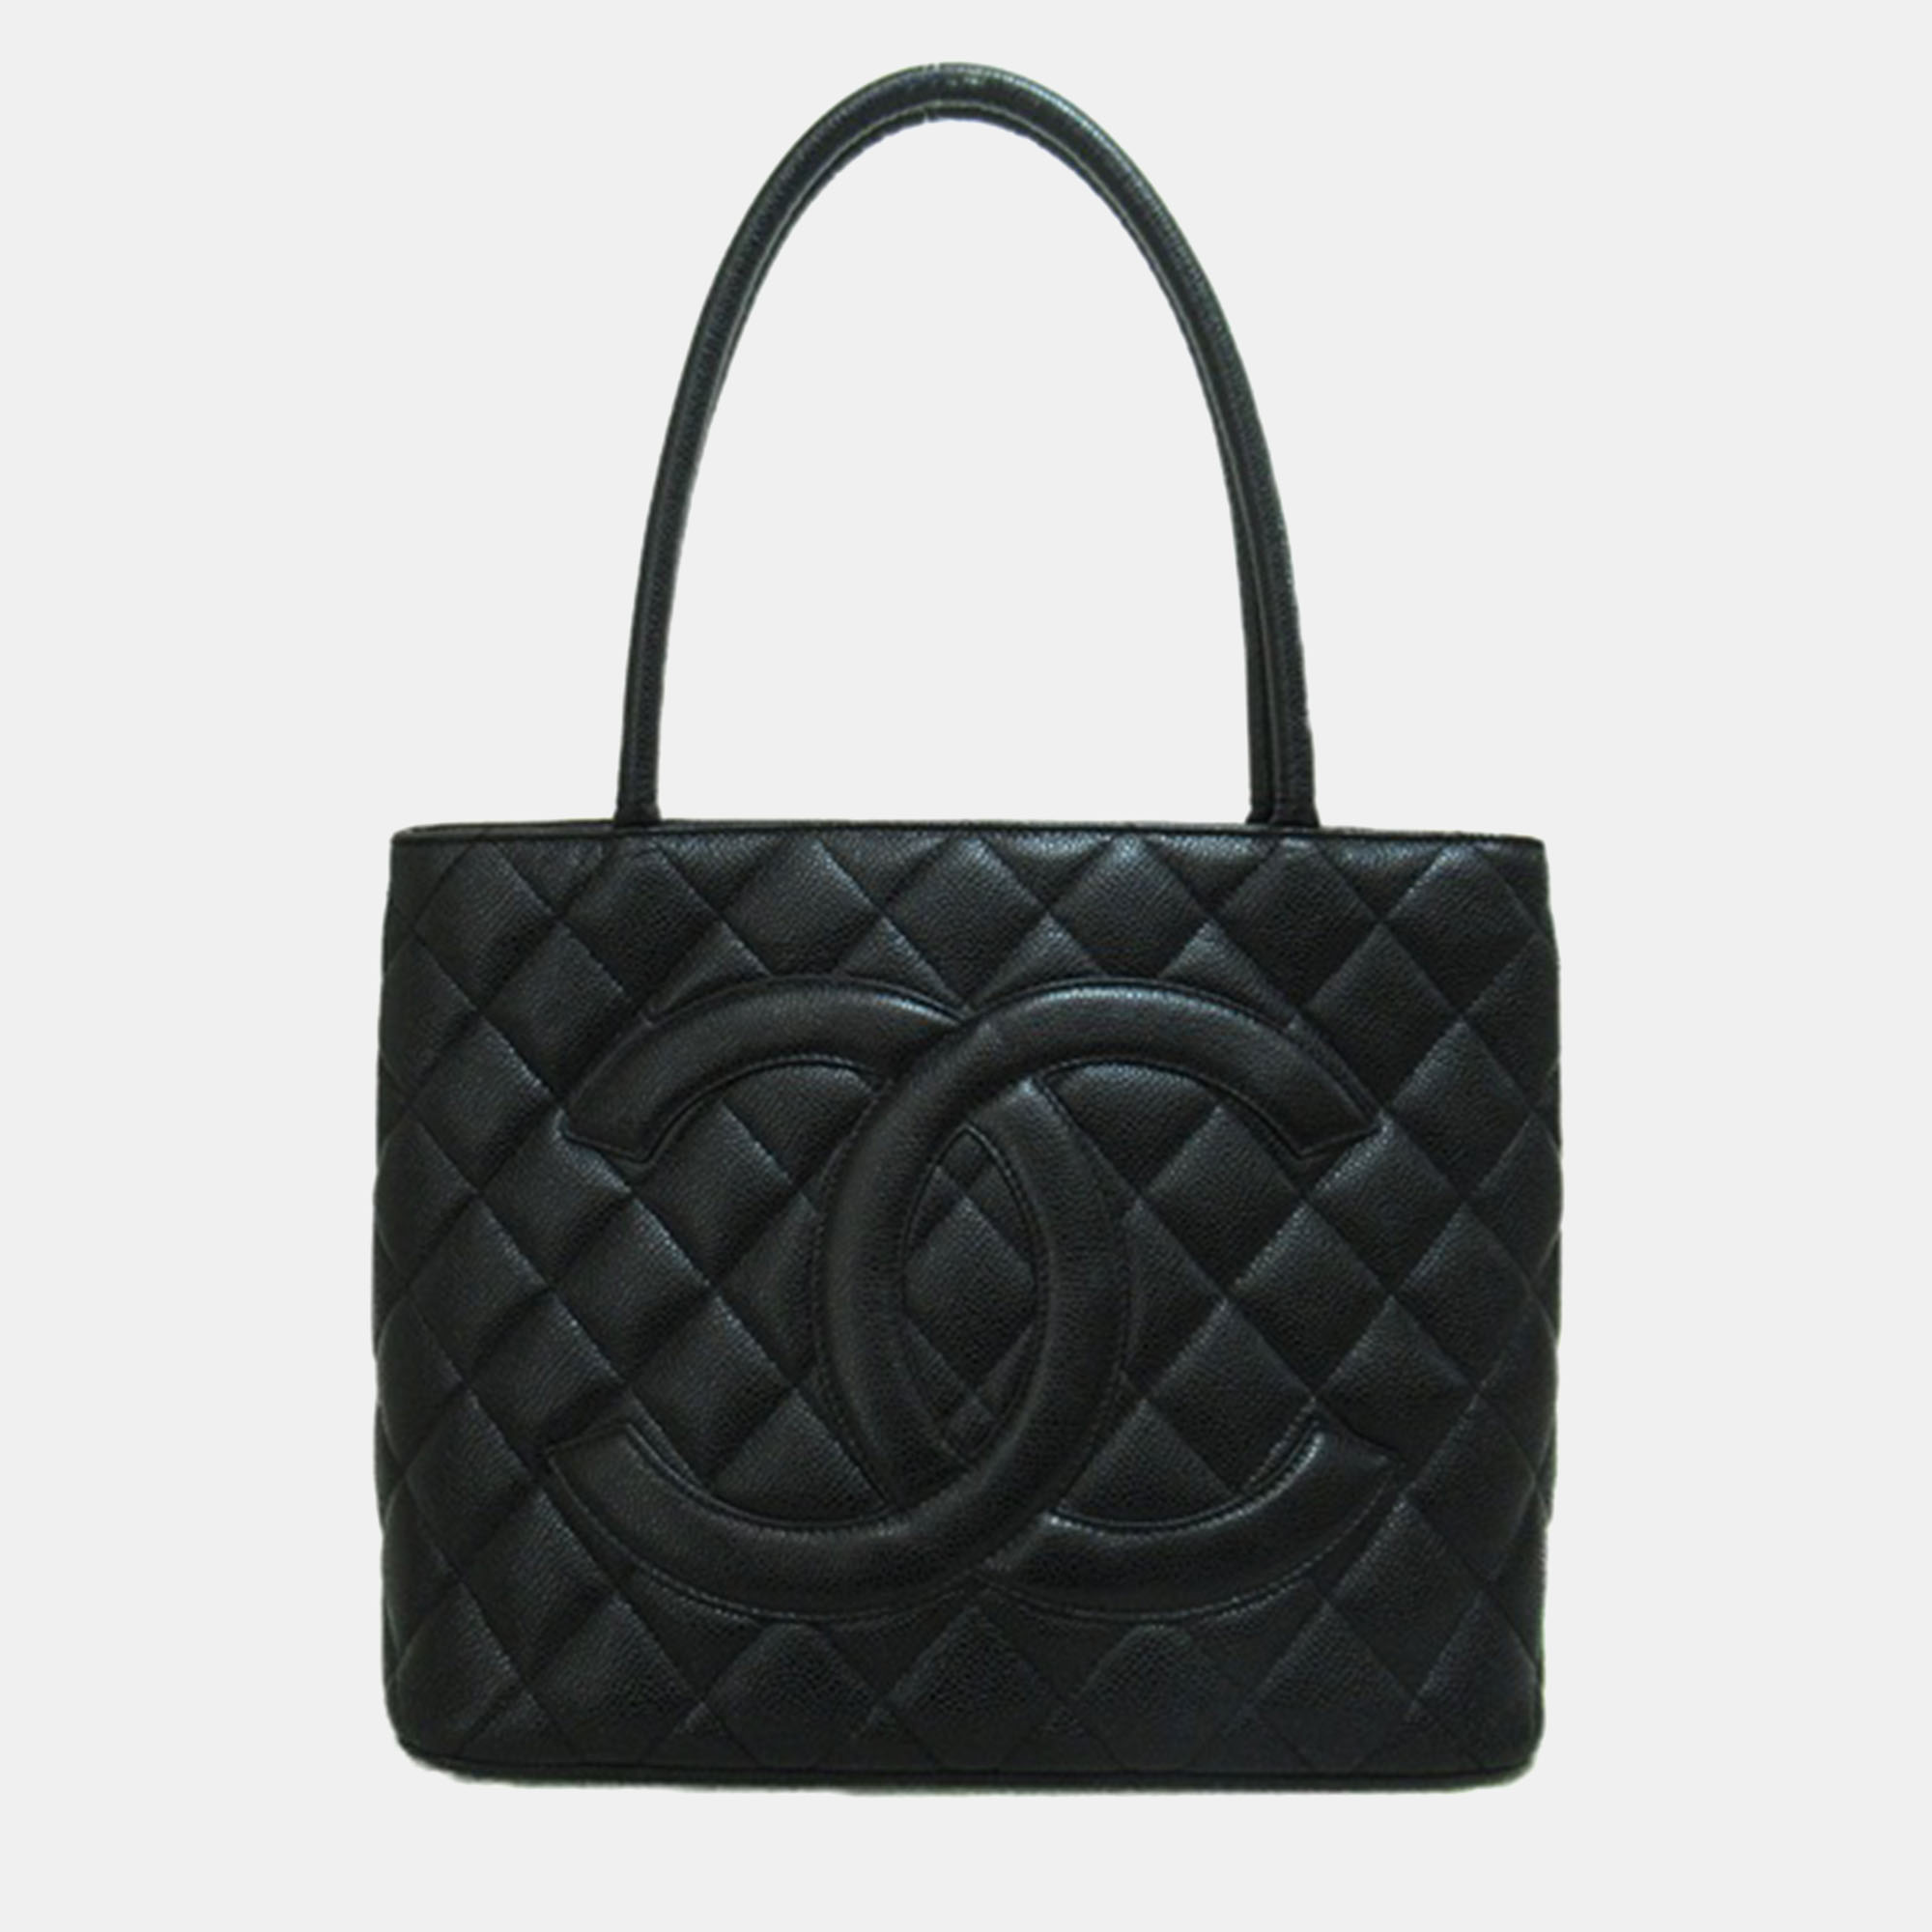 Pre-owned Chanel Black Leather Cc Caviar Medallion Tote Bag